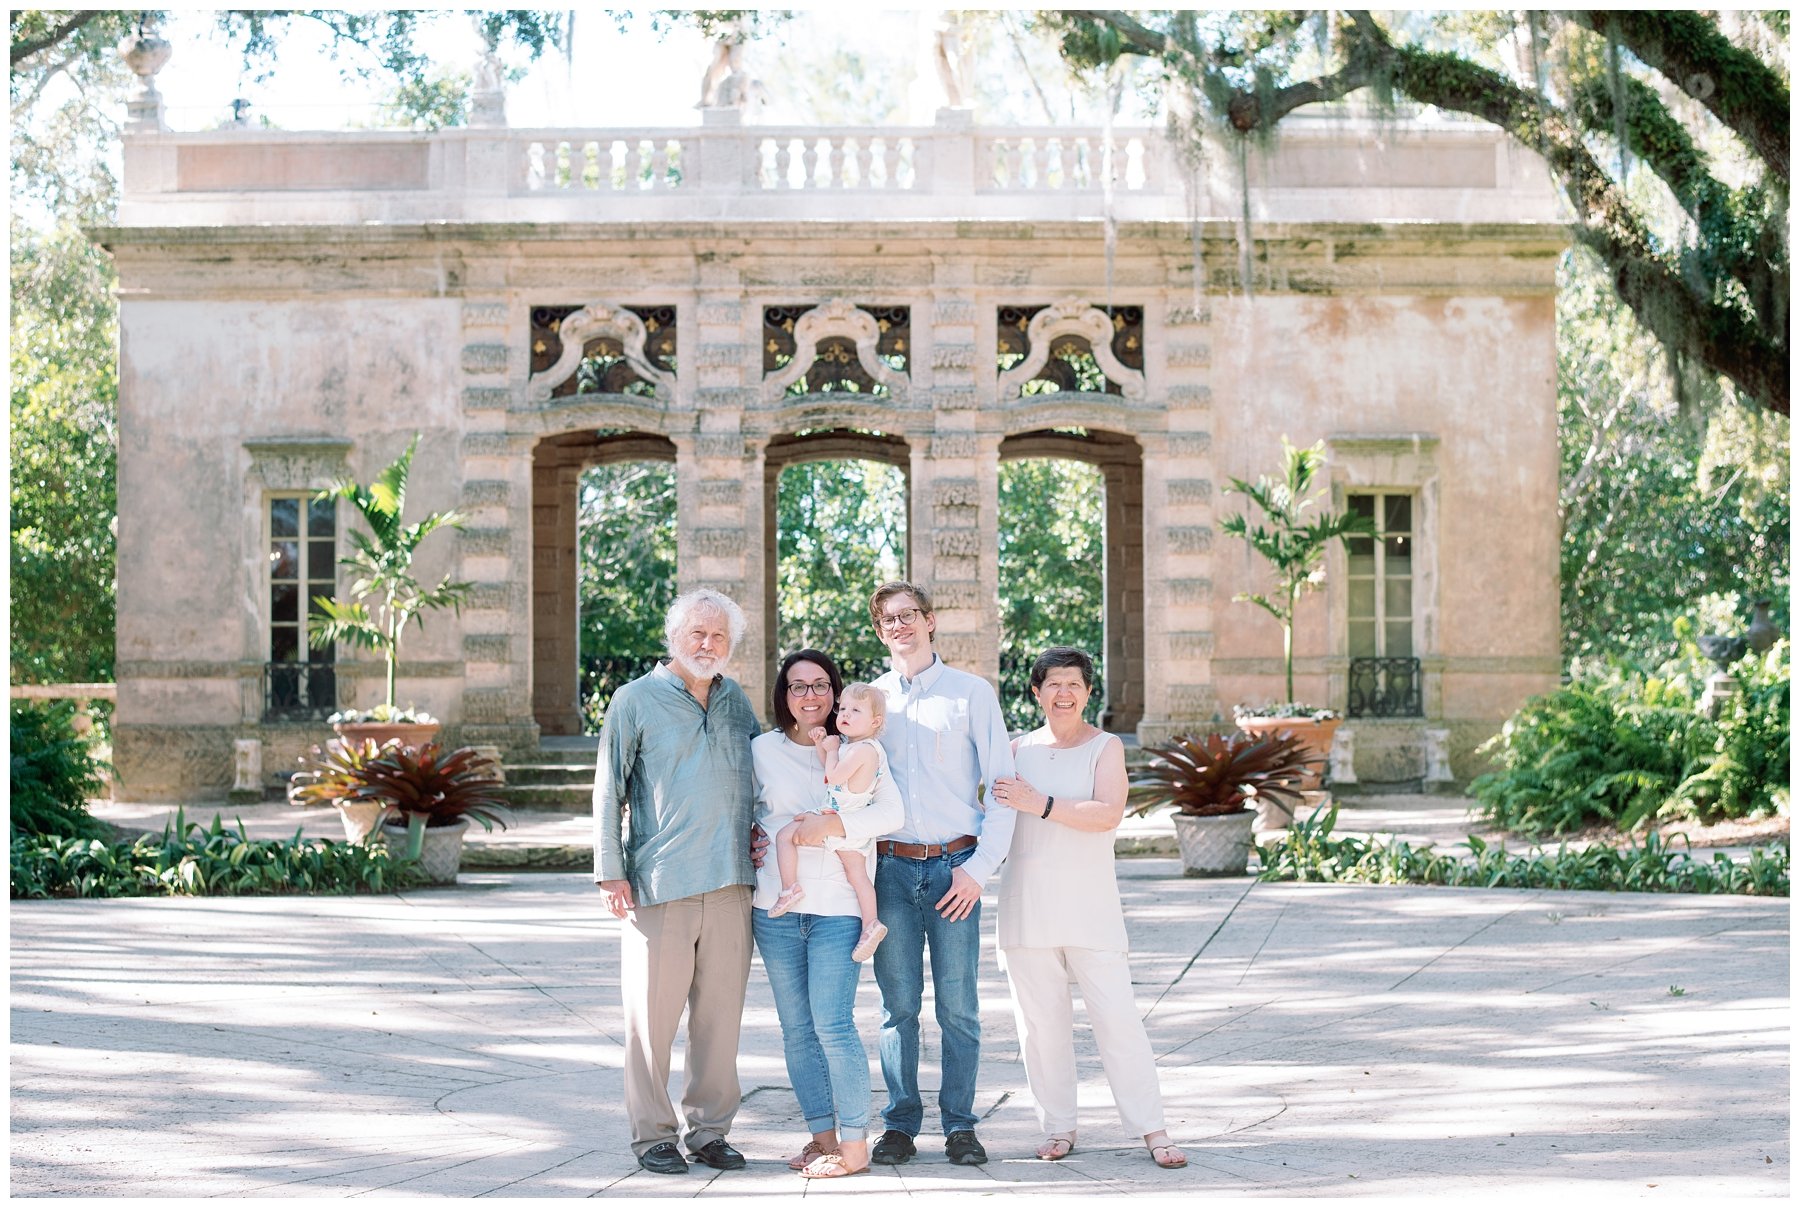 Family standing in front of arches at Vizcaya during session with Miami photographer | NKB Photo